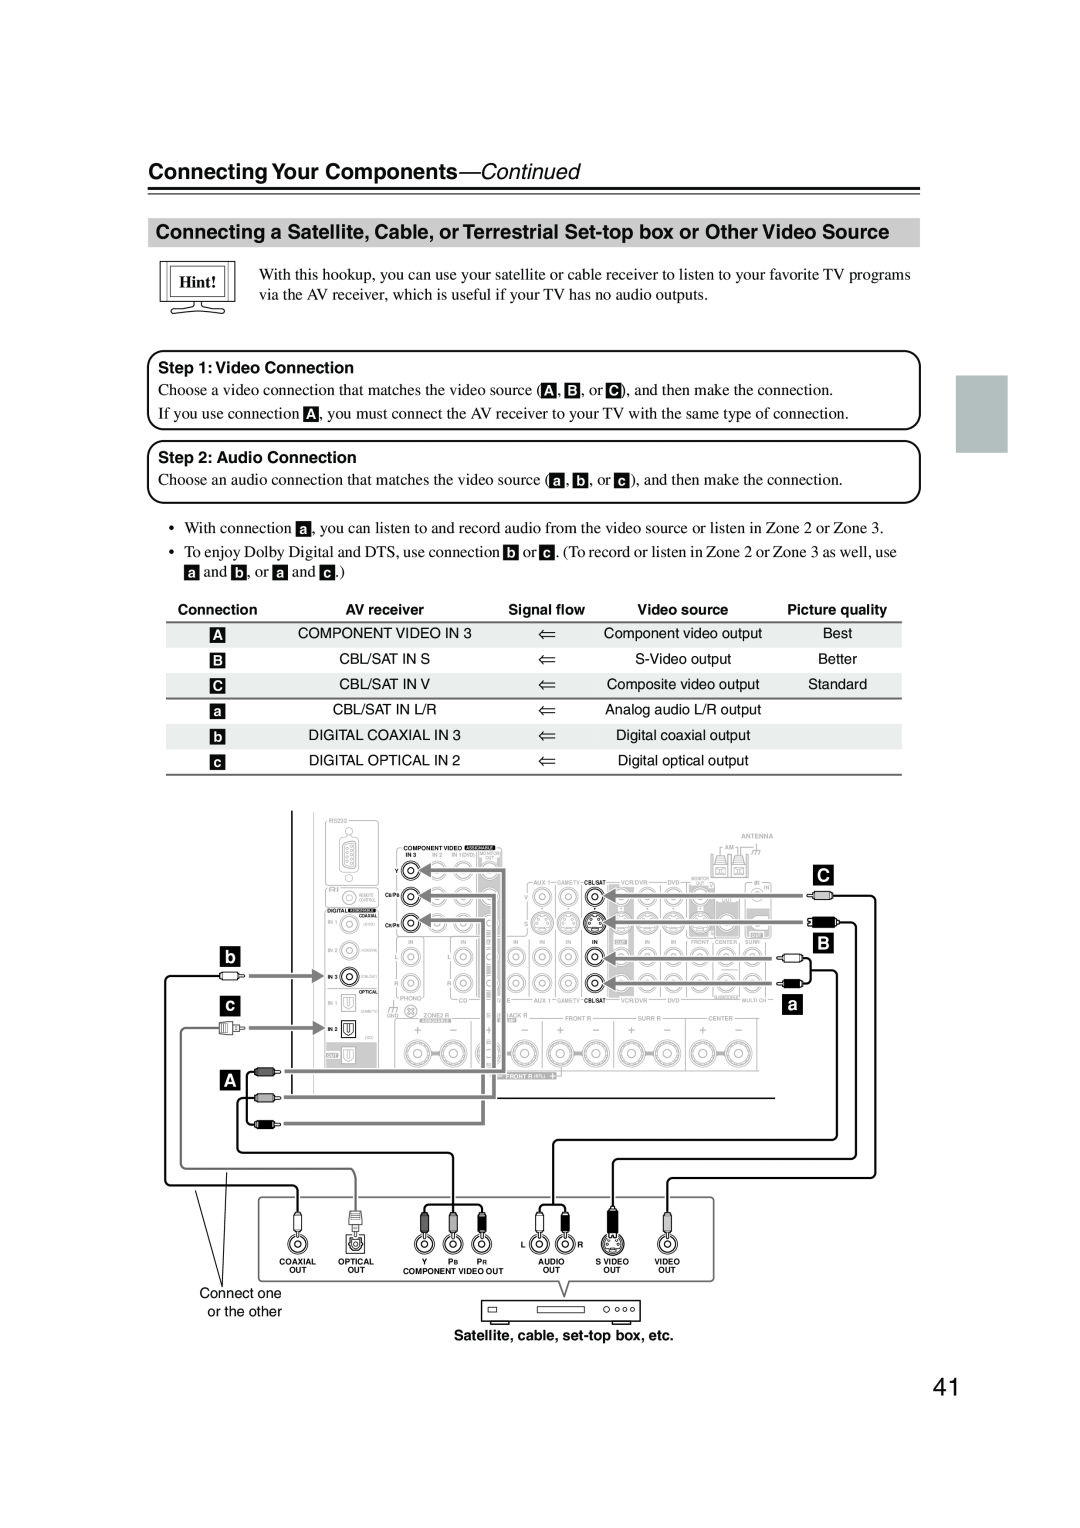 Onkyo TX-NR905 instruction manual Connecting Your Components—Continued, b c A, Hint, Satellite, cable, set-topbox, etc 